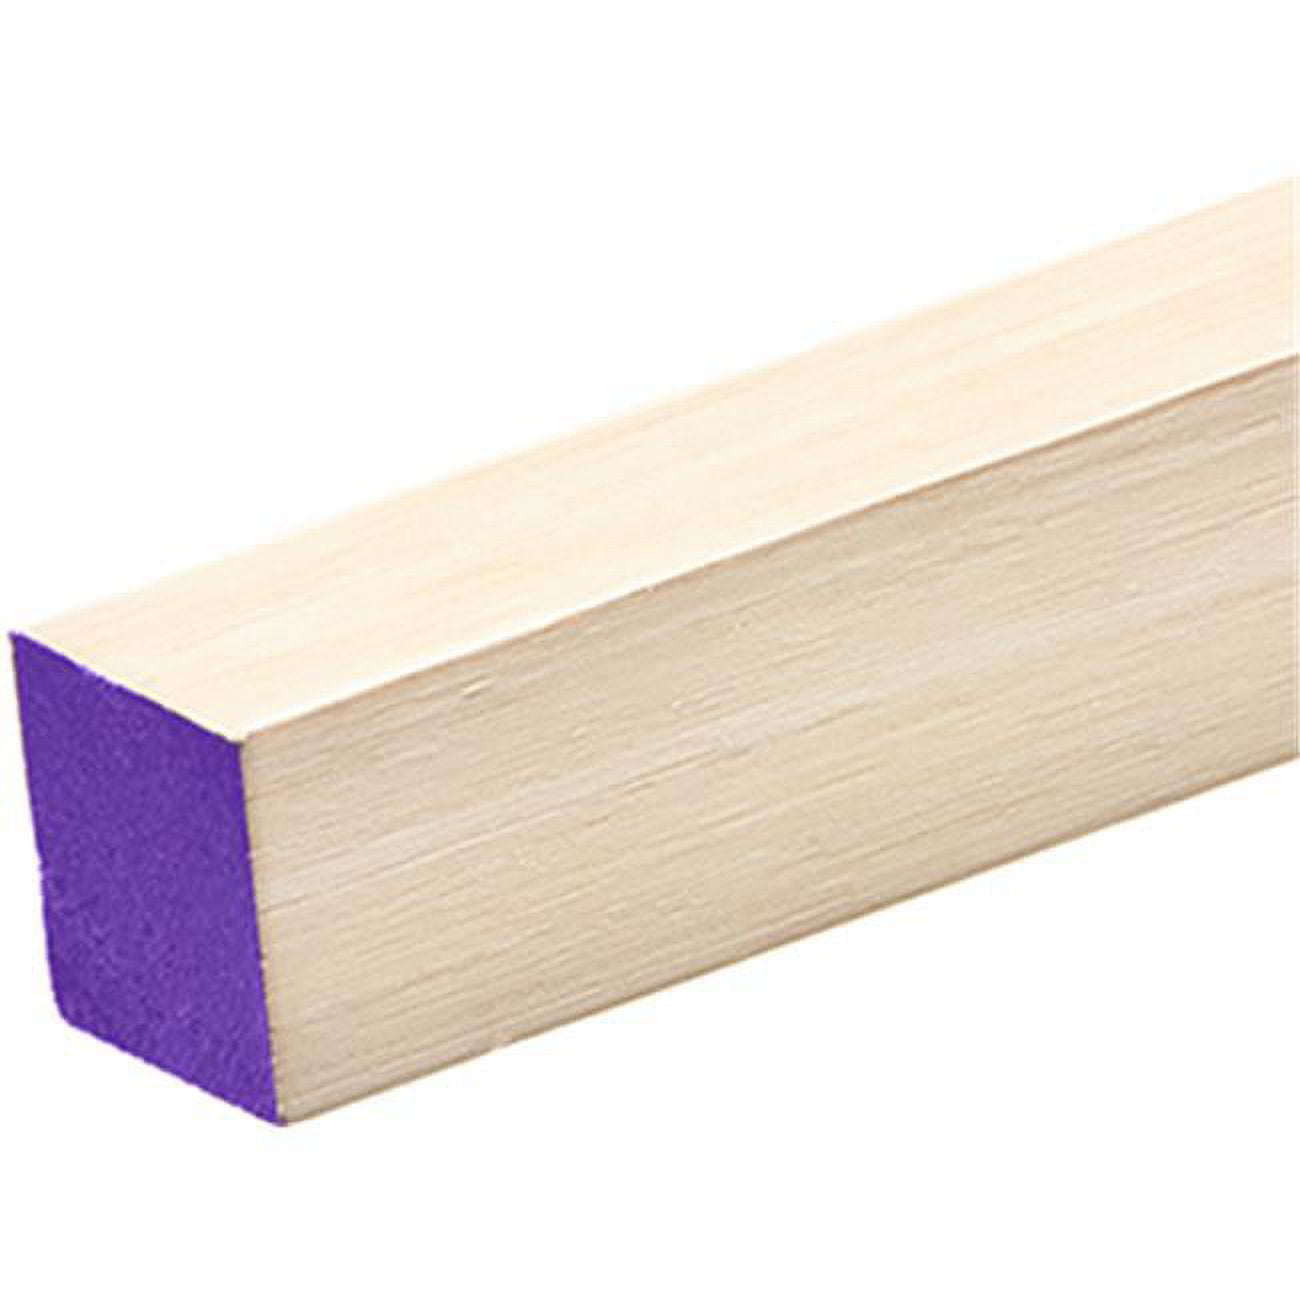 12126 0.5 X 36 In. Square Wood Dowel - Pack Of 49